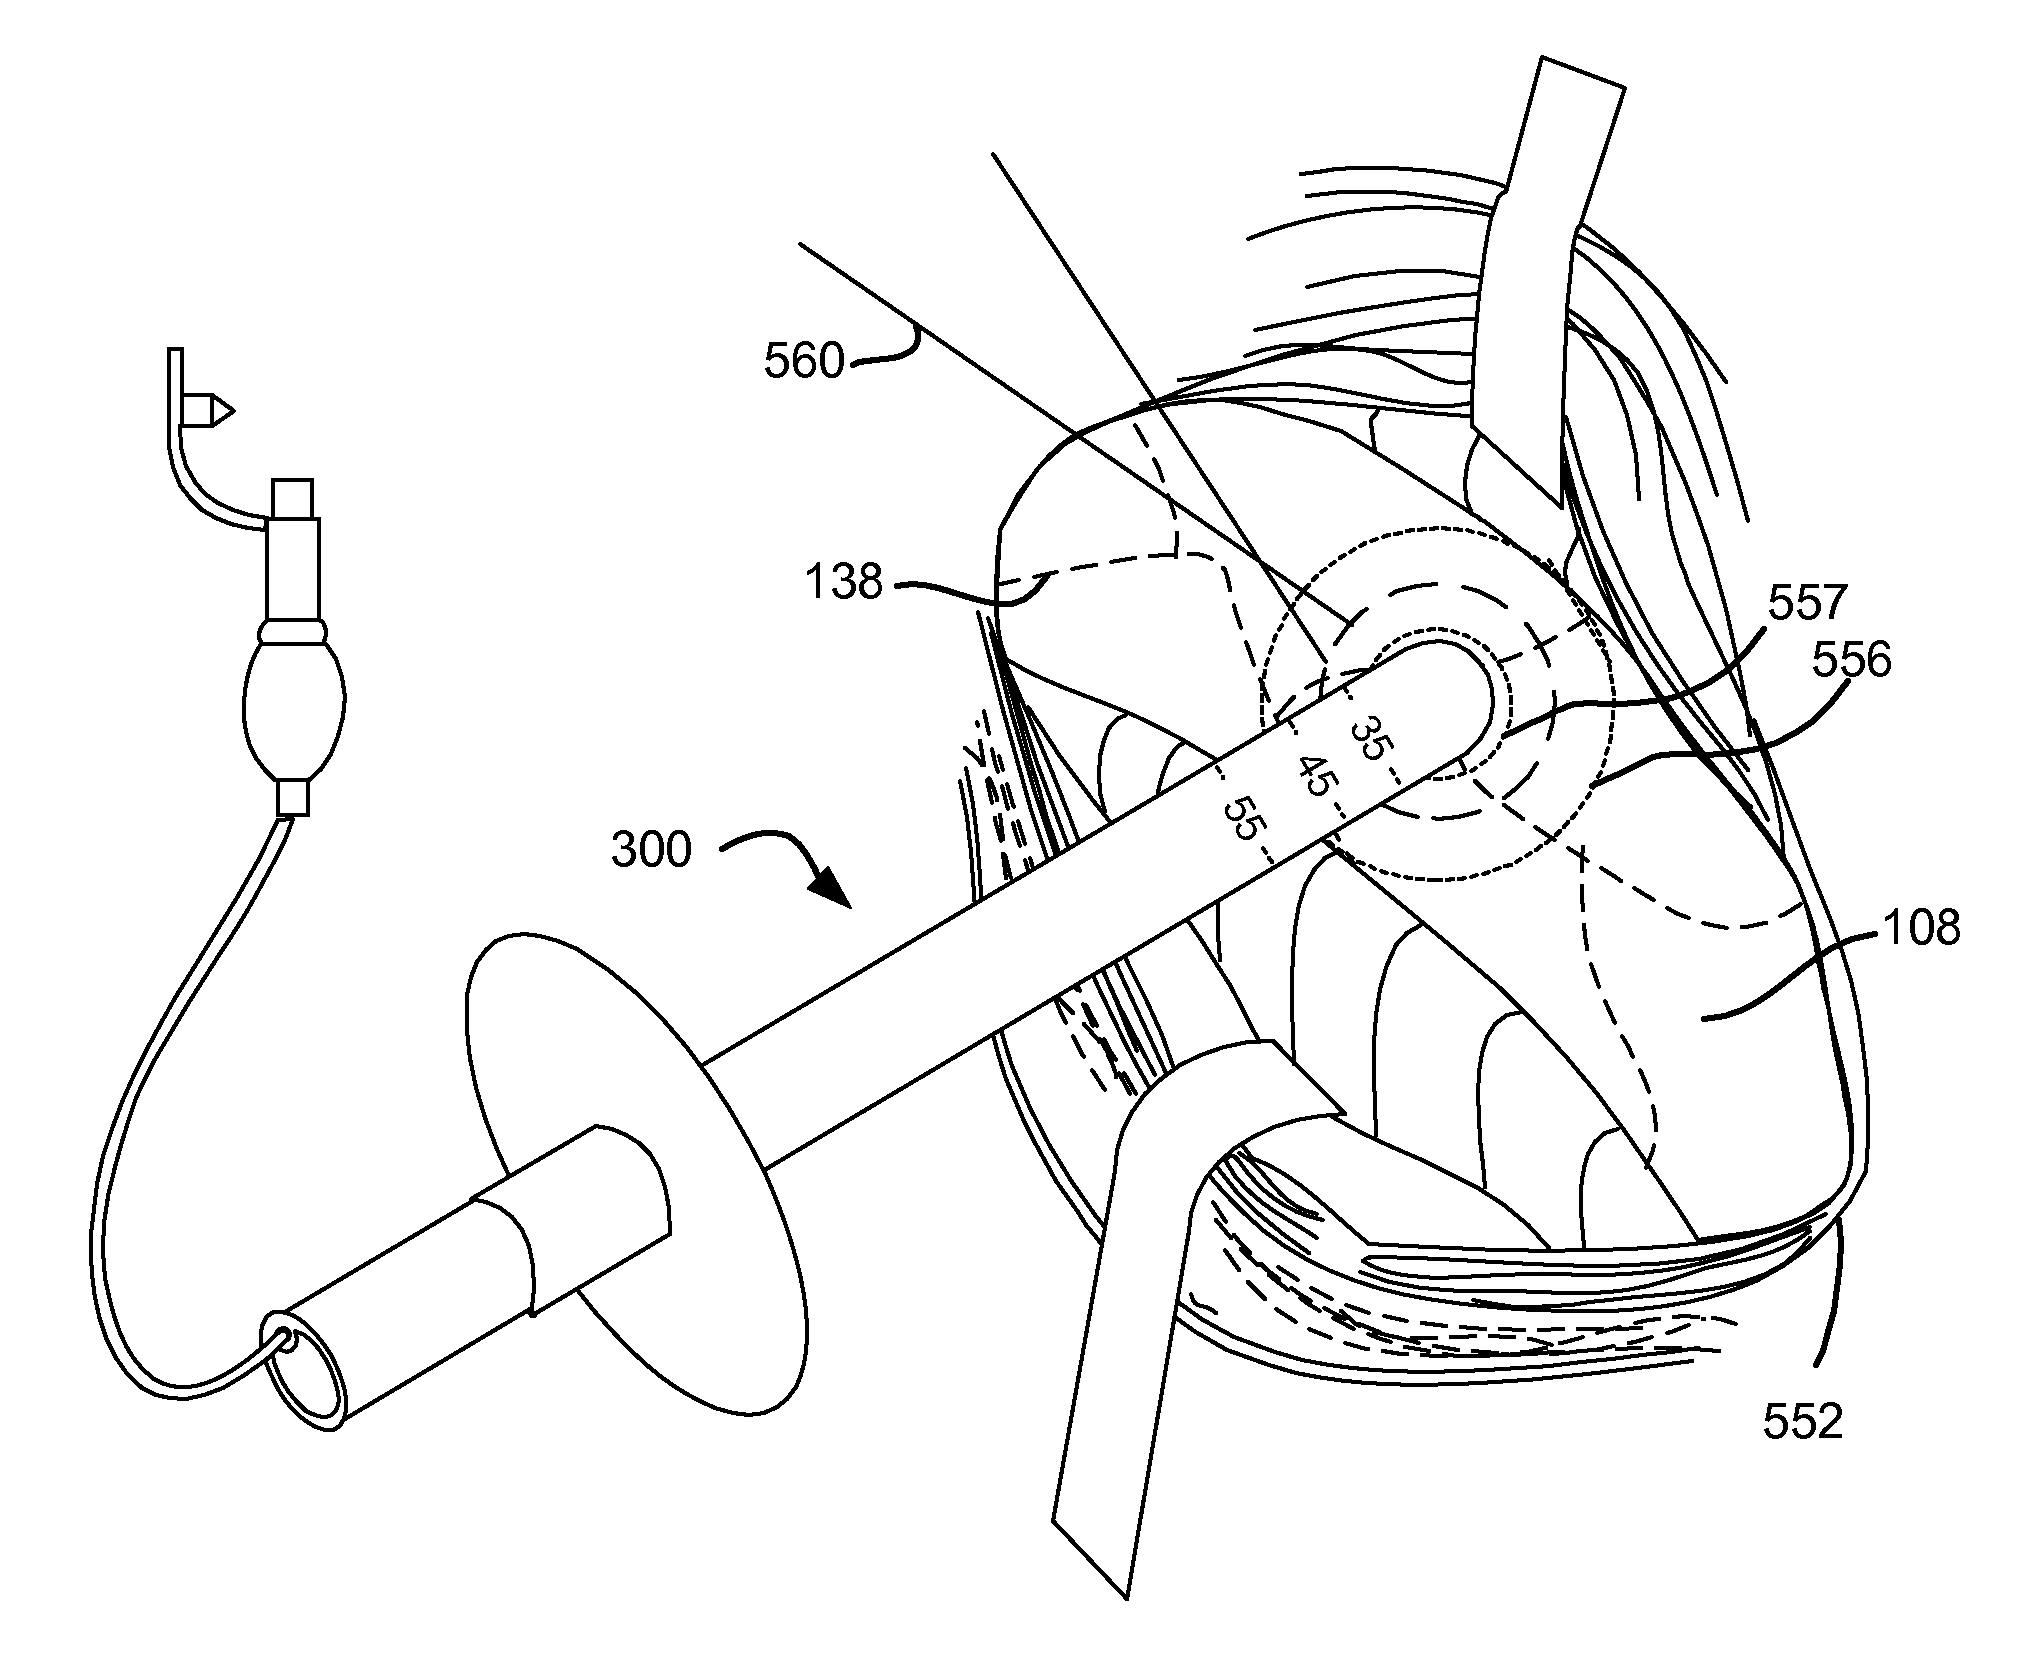 Single-phase surgical procedure for creating a pneumostoma to treat chronic obstructive pulmonary disease